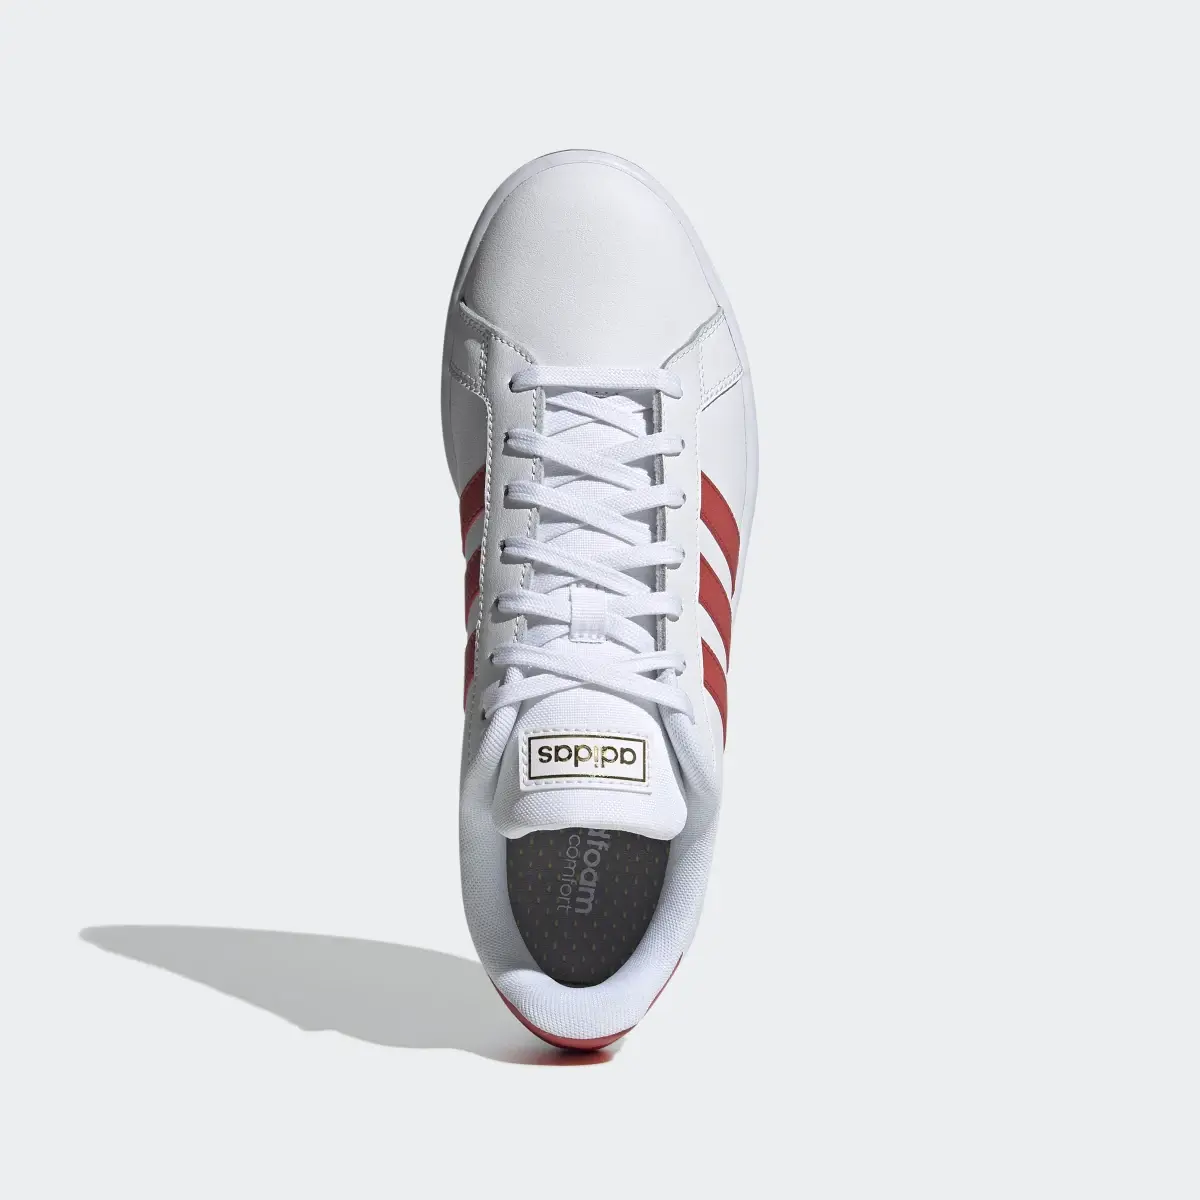 Adidas Grand Court Shoes. 3